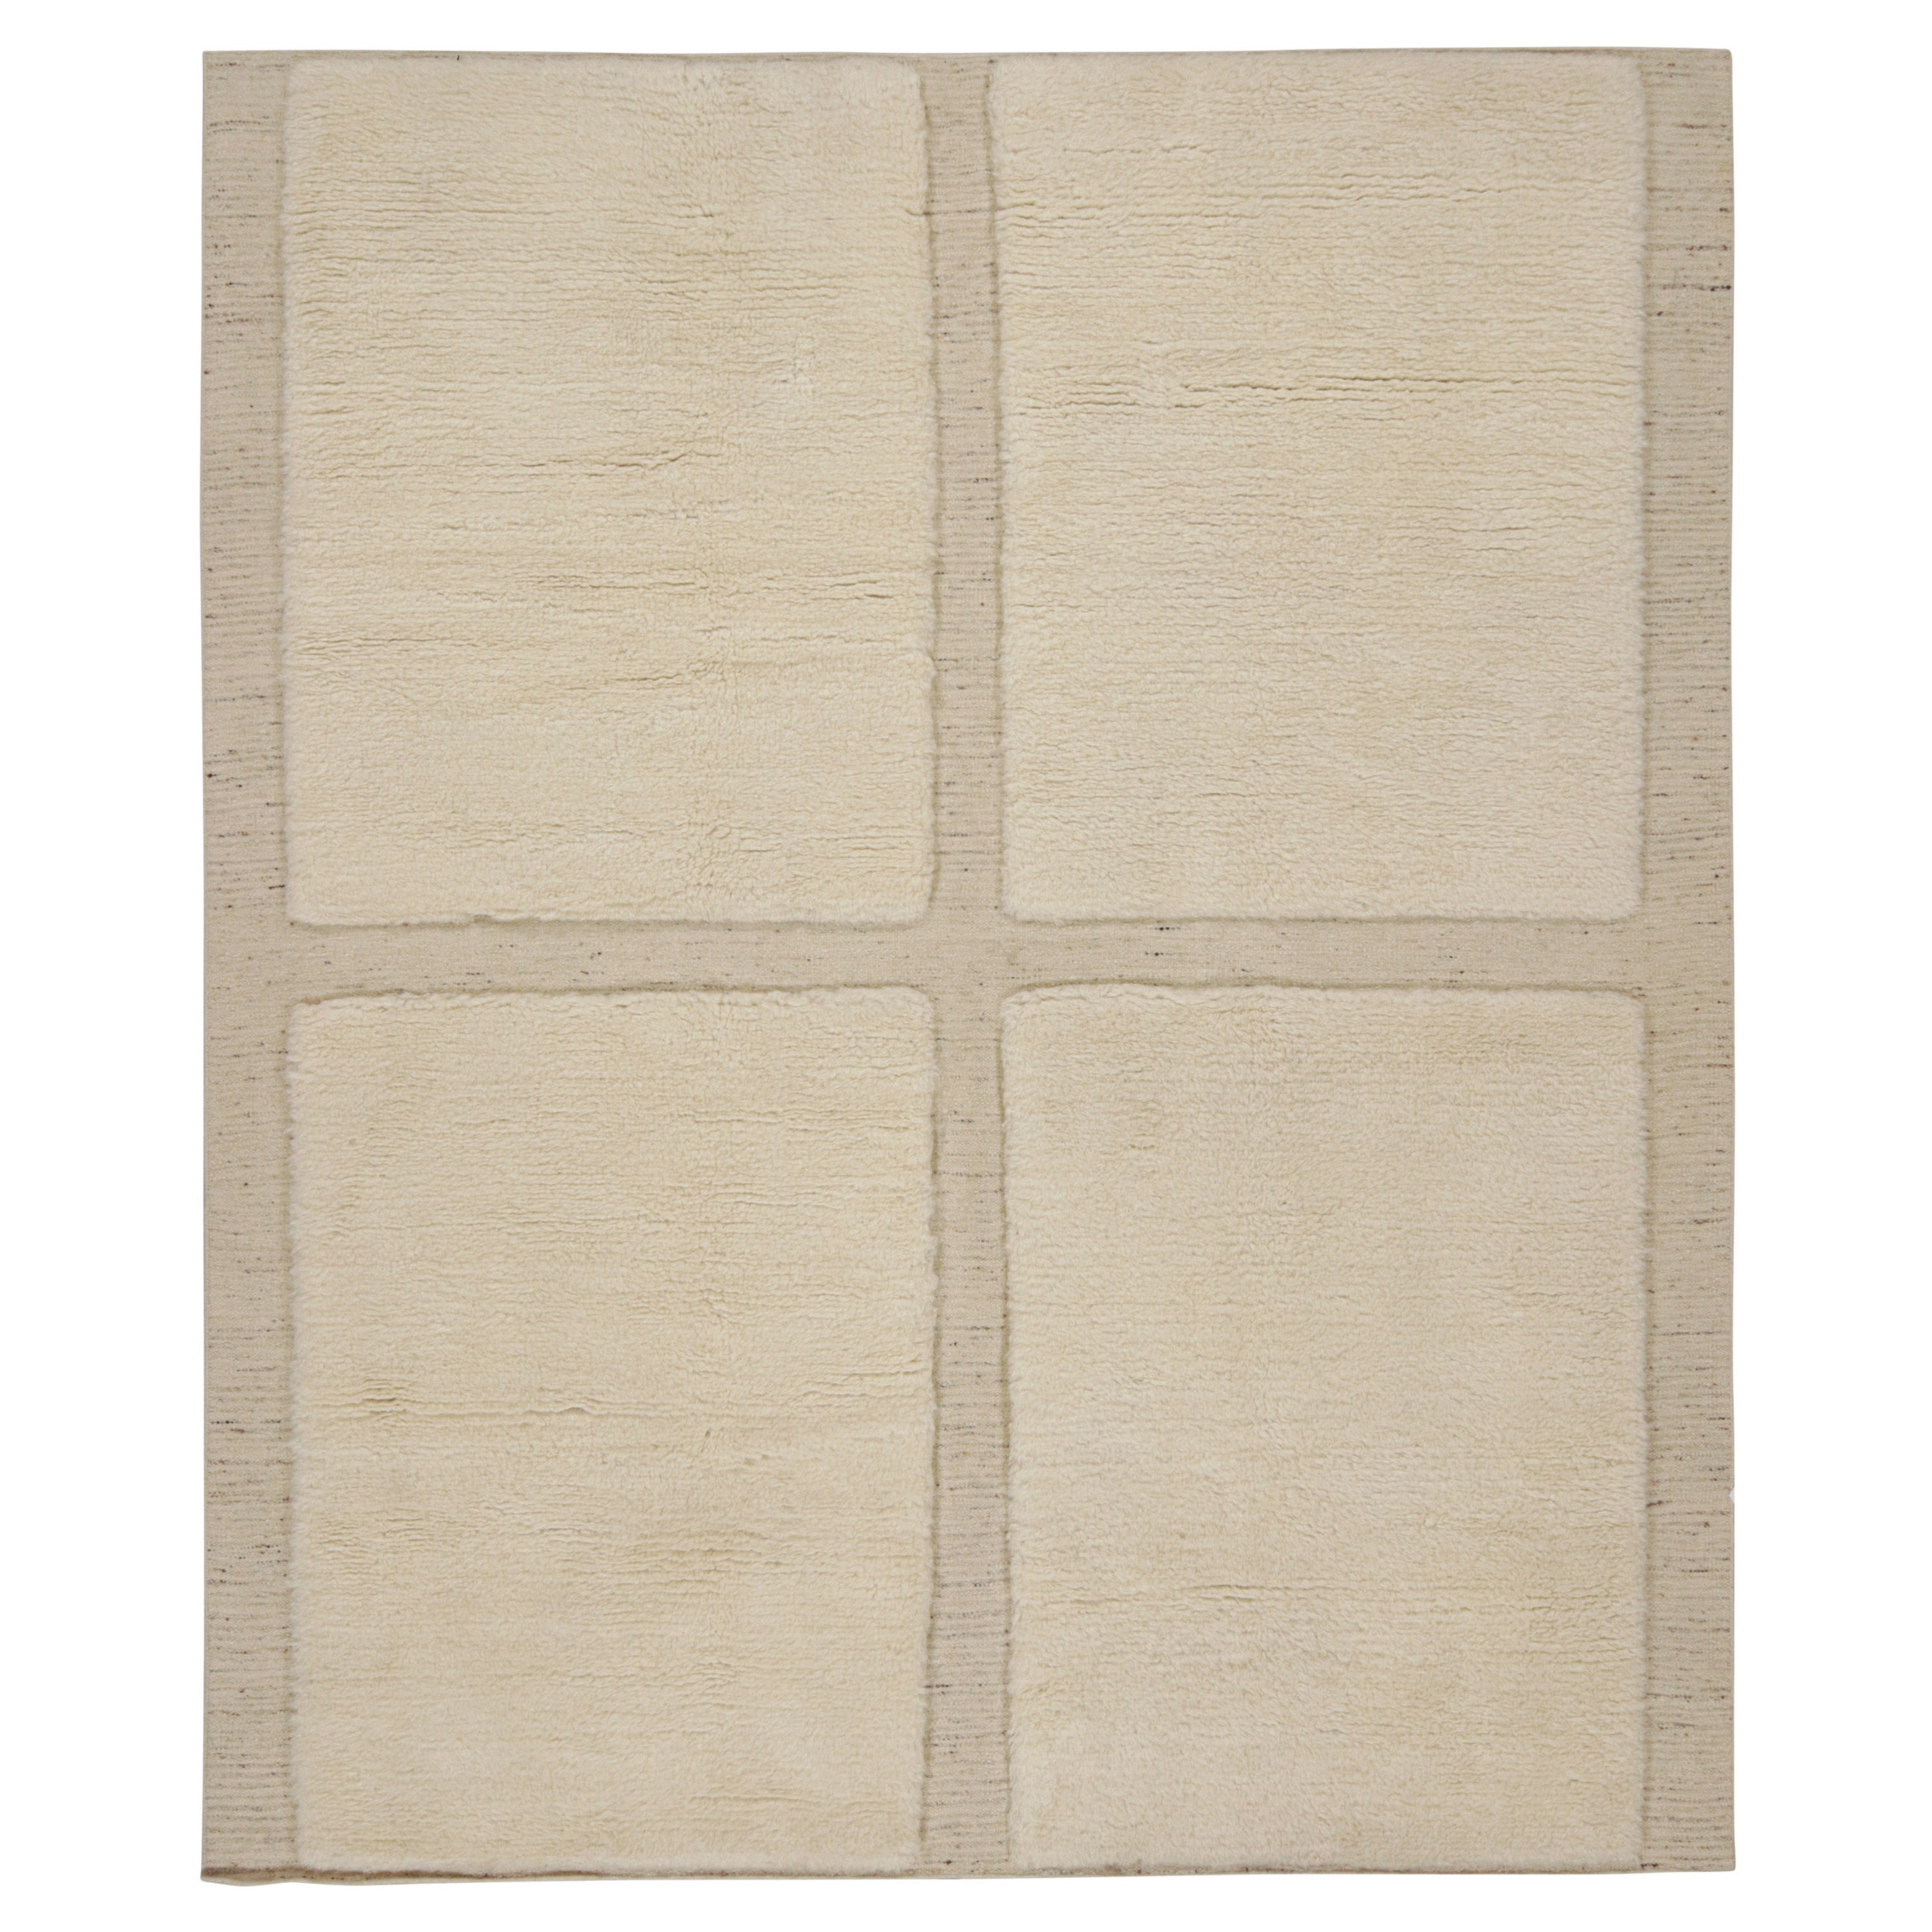 Rug & Kilim’s Moroccan Style Rug with Cream Tone High-Pile Geometric Patterns